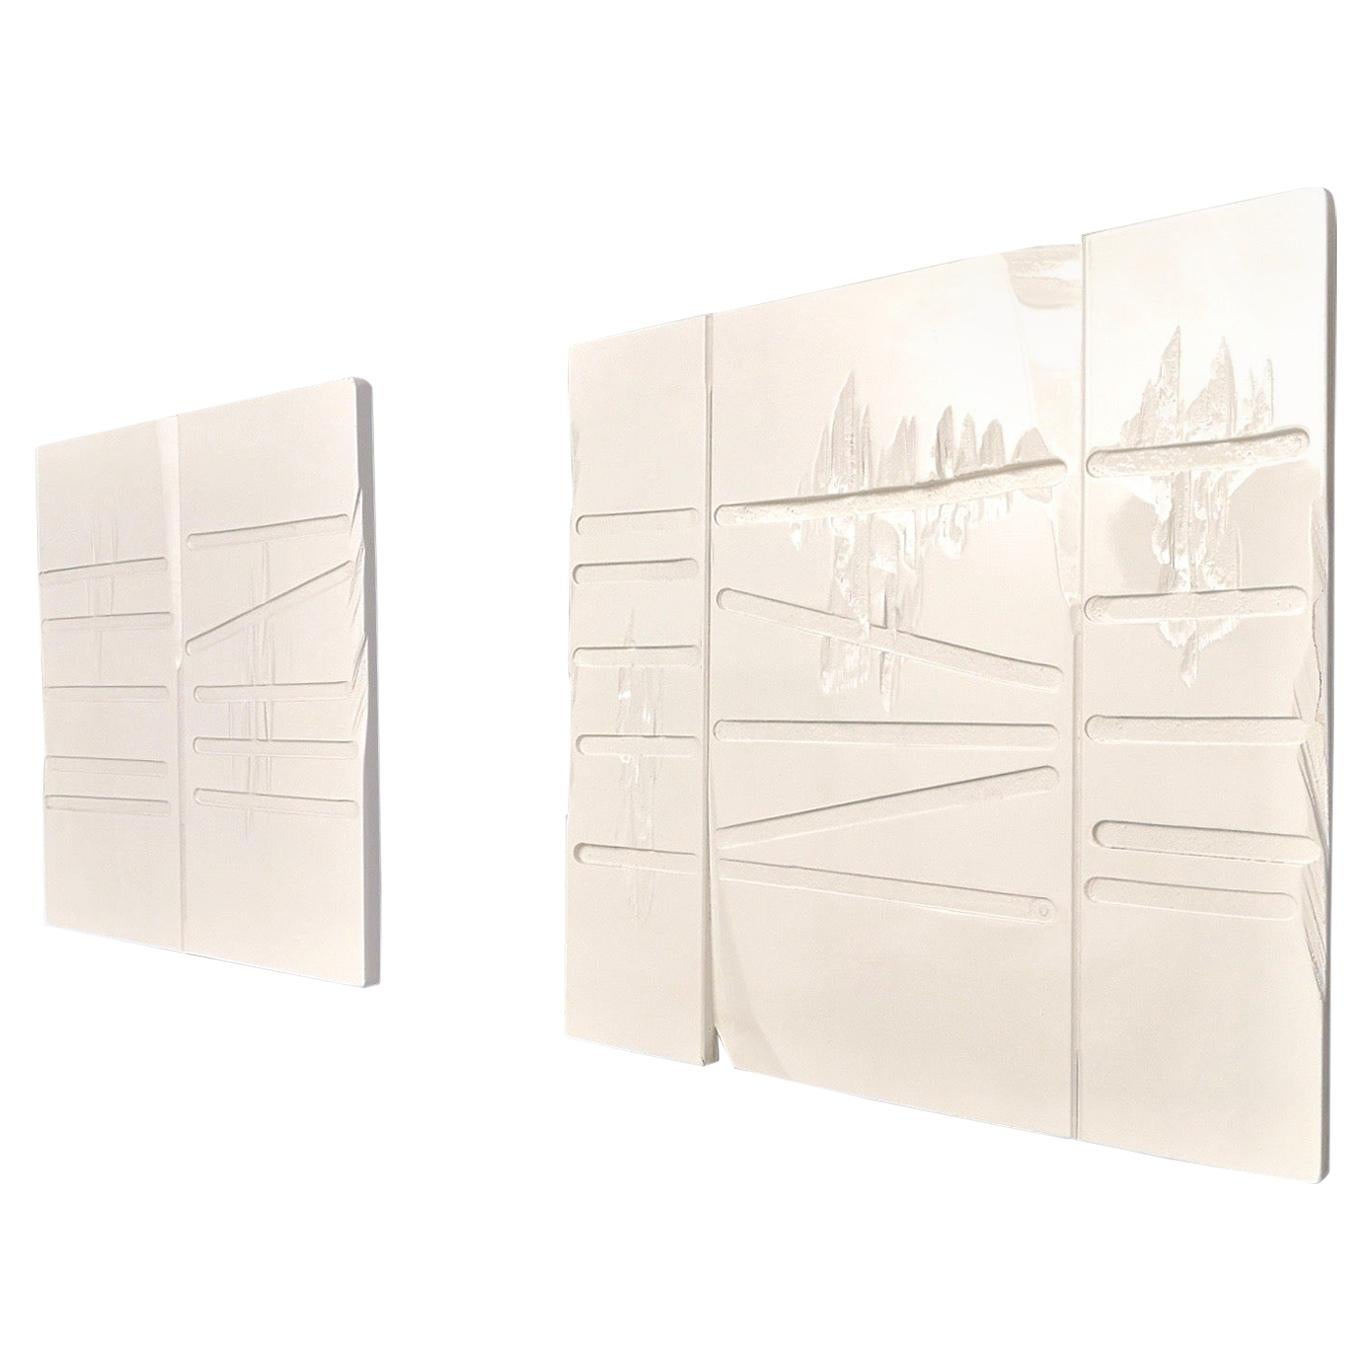 Pair of Squared Carved White Lacquered Wood Decorative Panels, Italy, 1990s